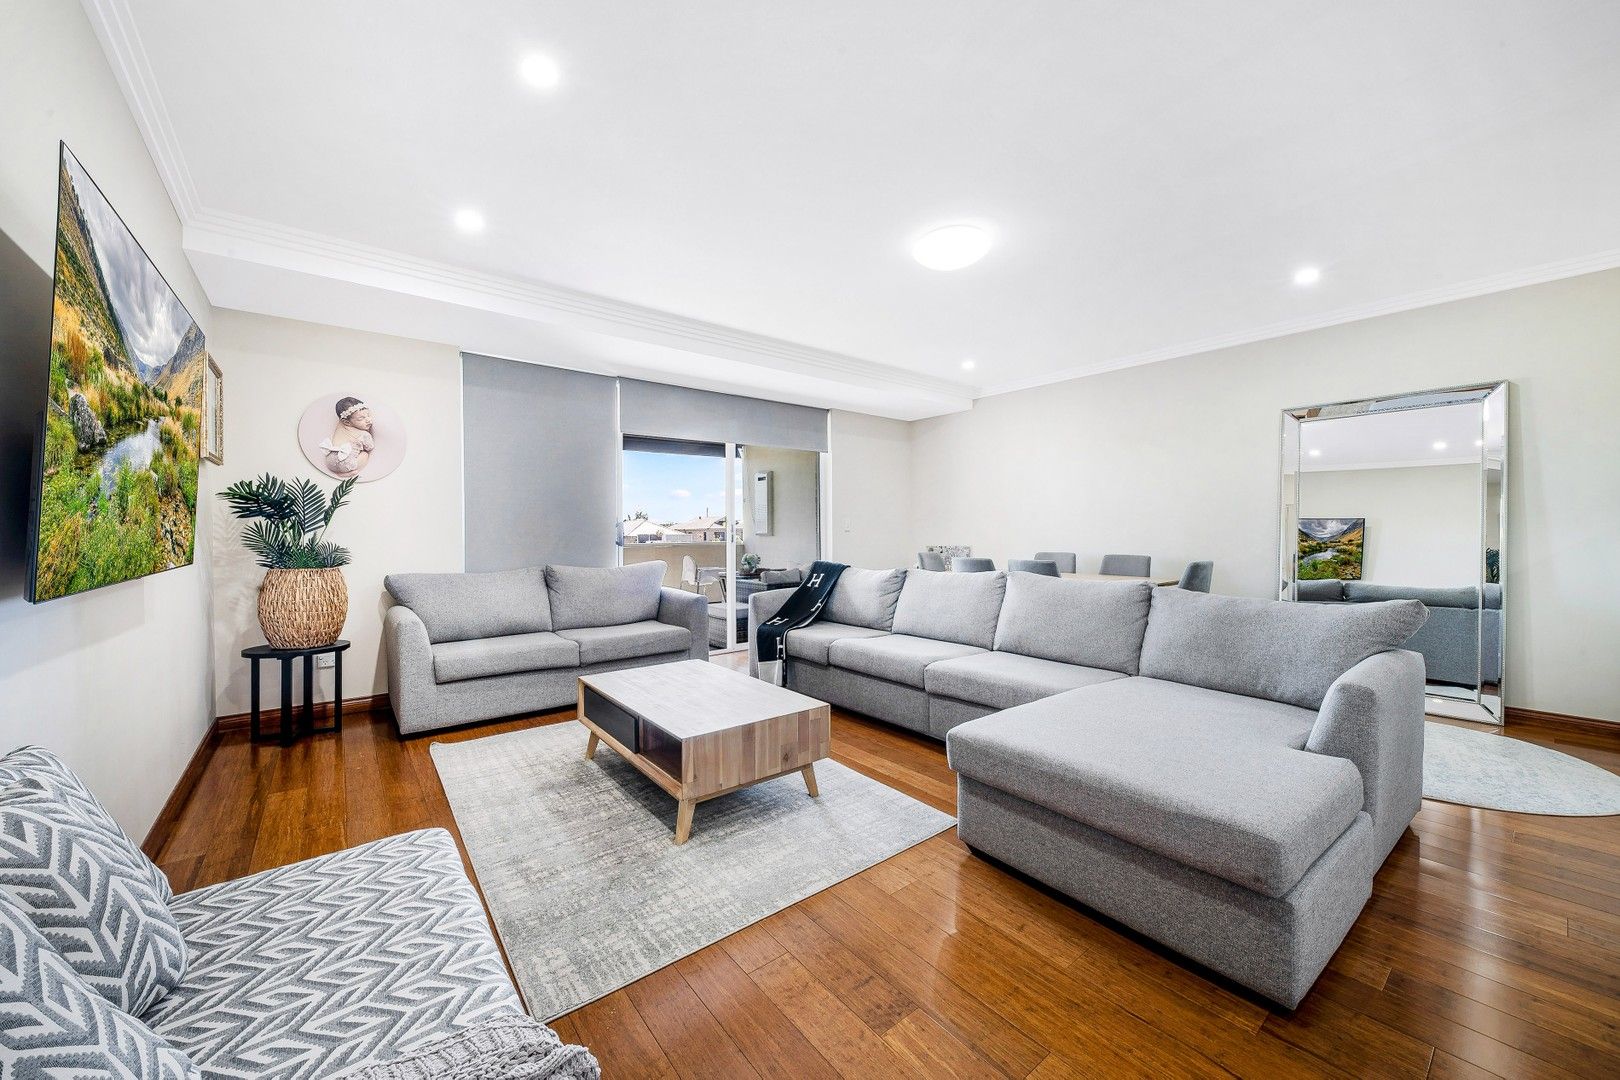 2 bedrooms Apartment / Unit / Flat in 103/41 Constance Street GUILDFORD NSW, 2161